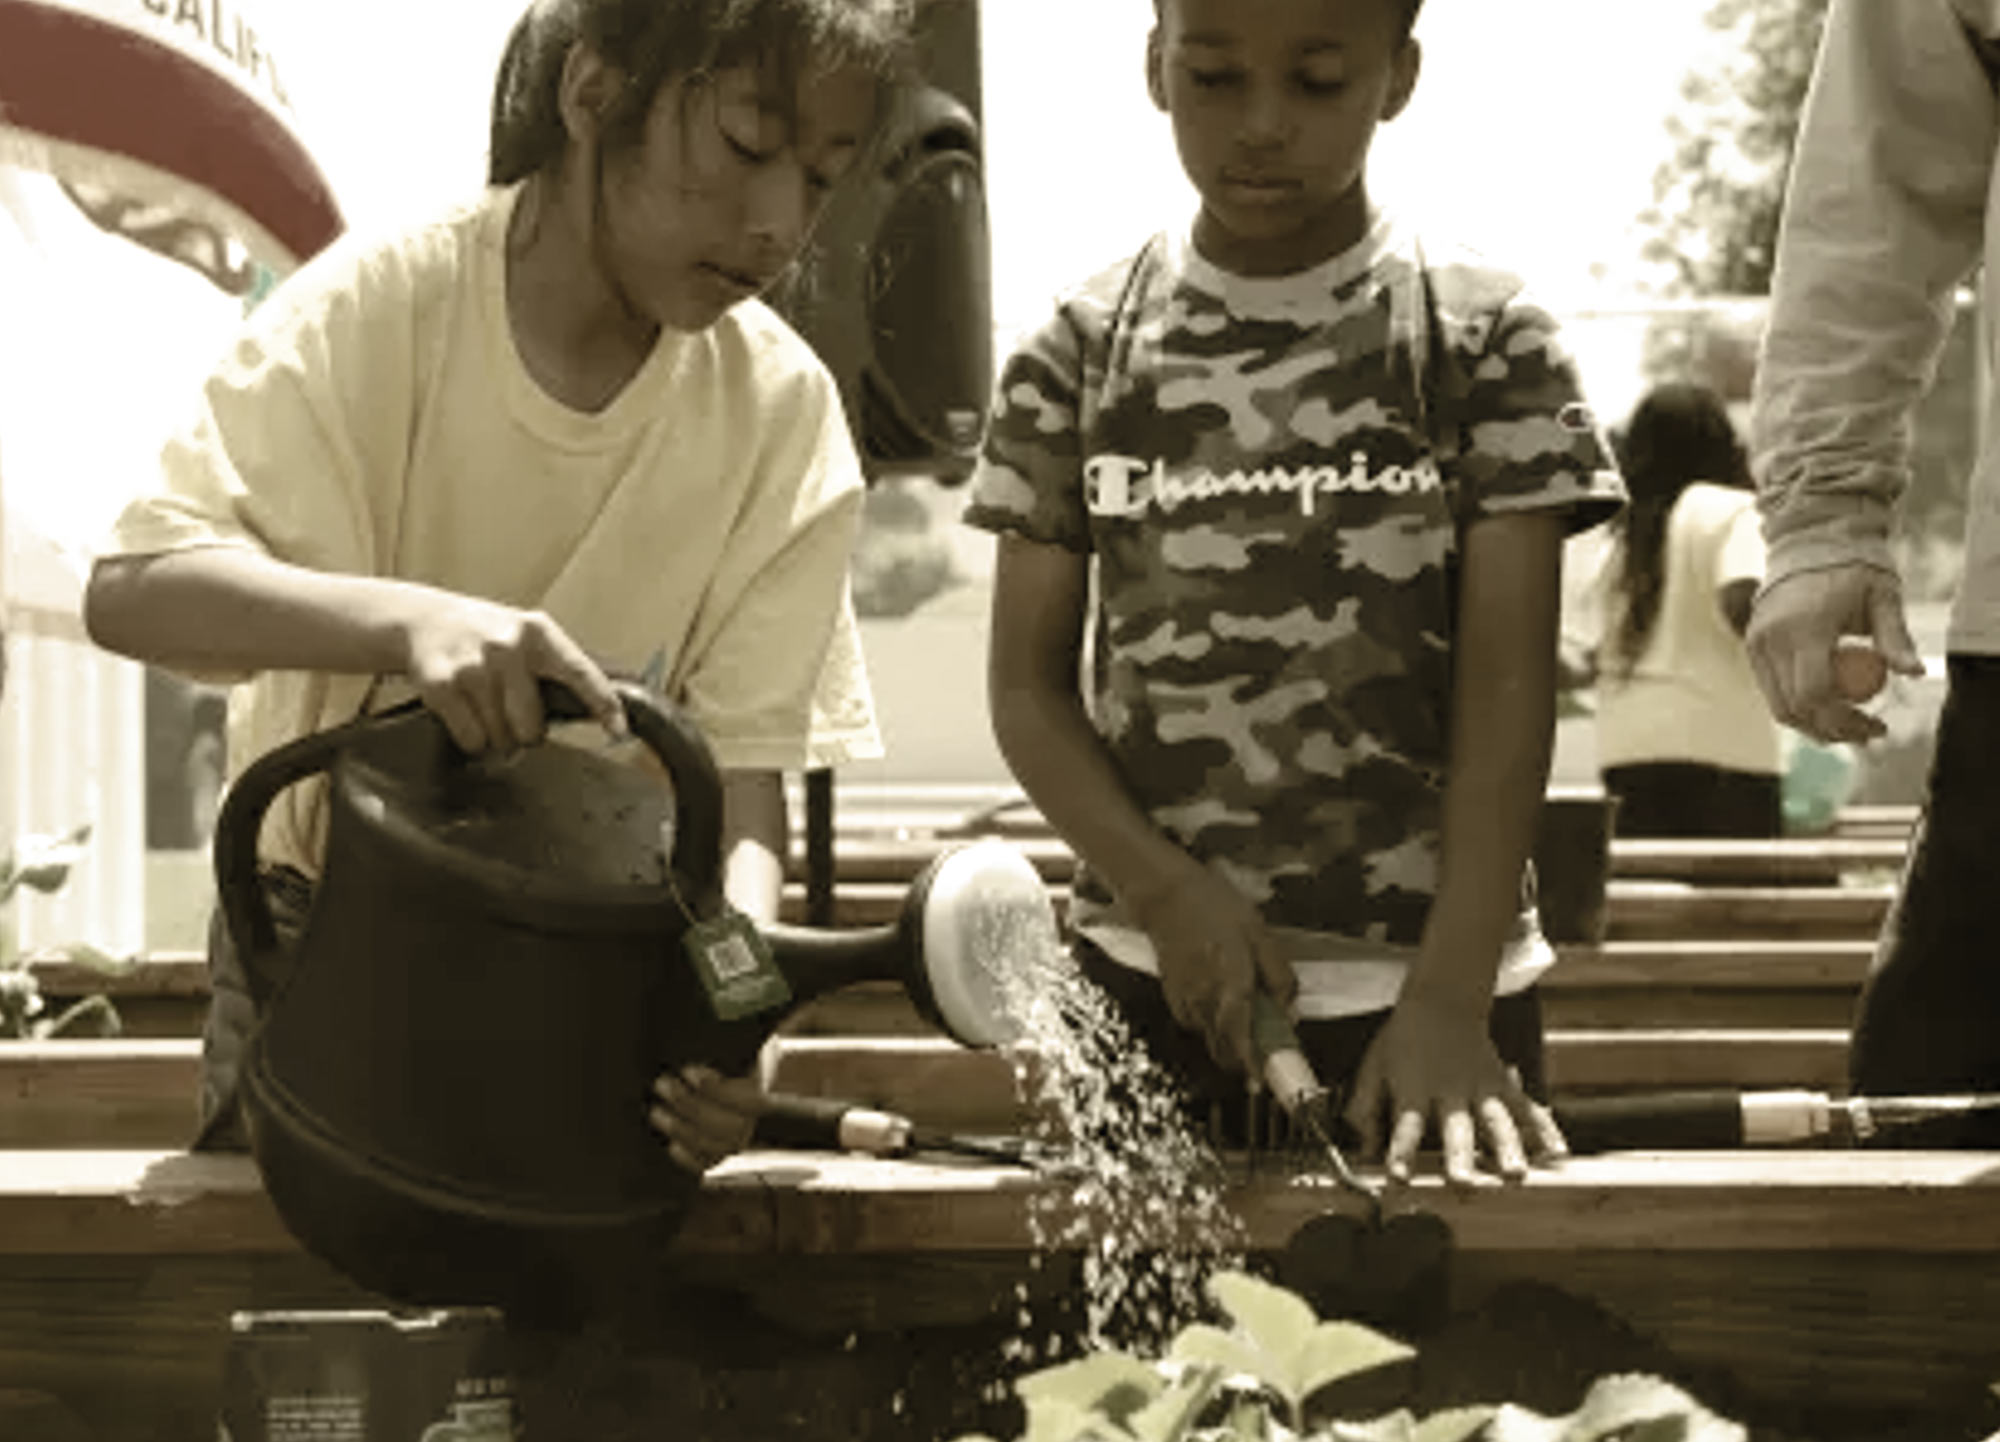 two elementary aged children water and tend to plants in an outdoor garden